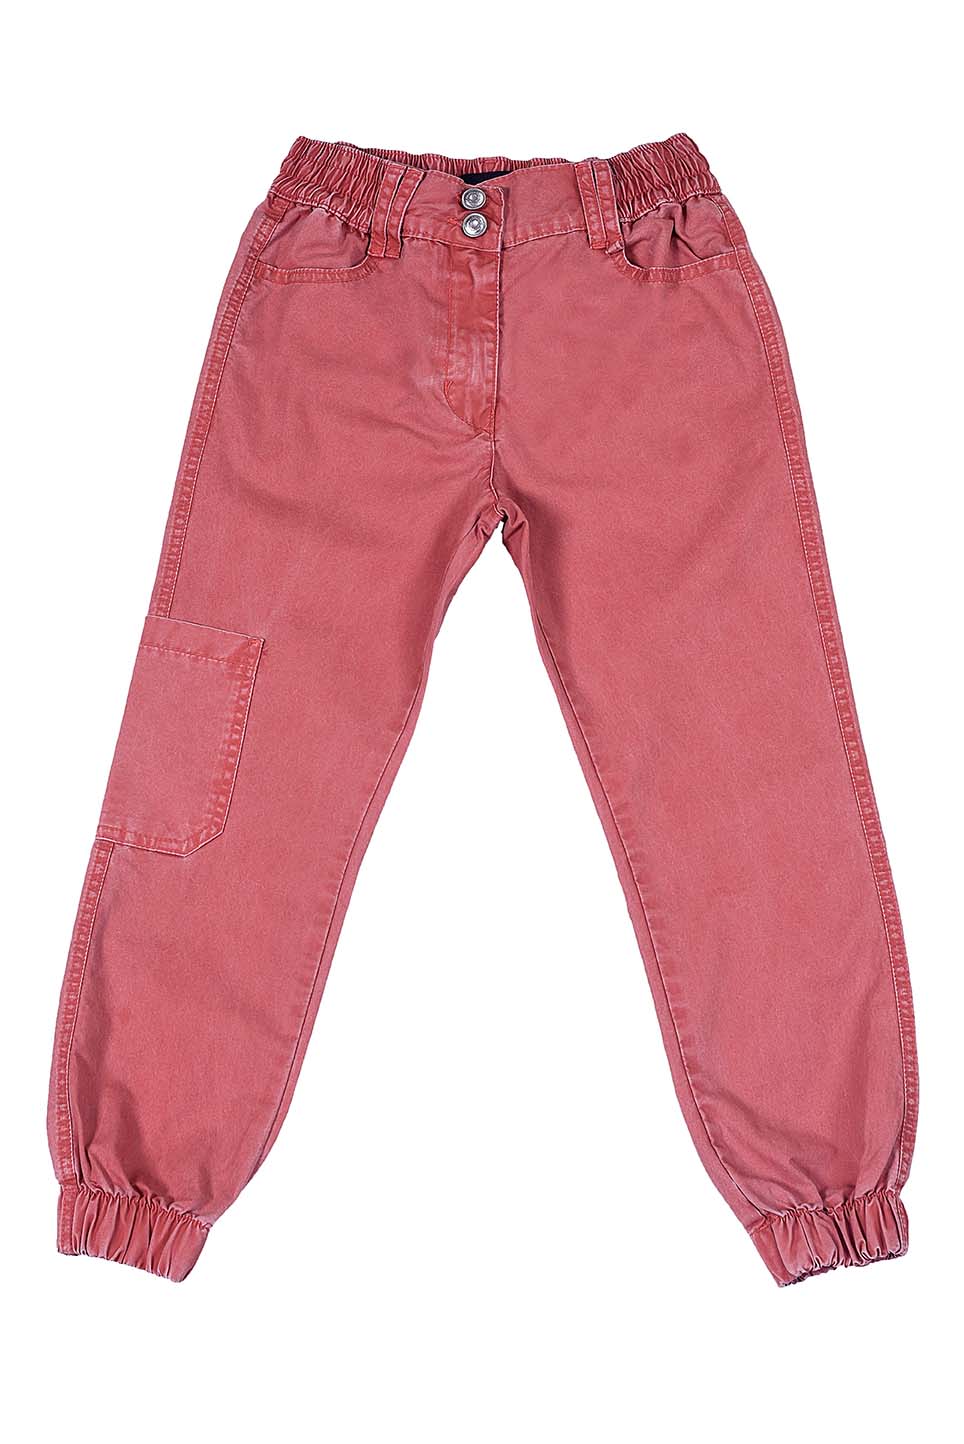 KDS-G-12974 PULL ON TROUSER RUST